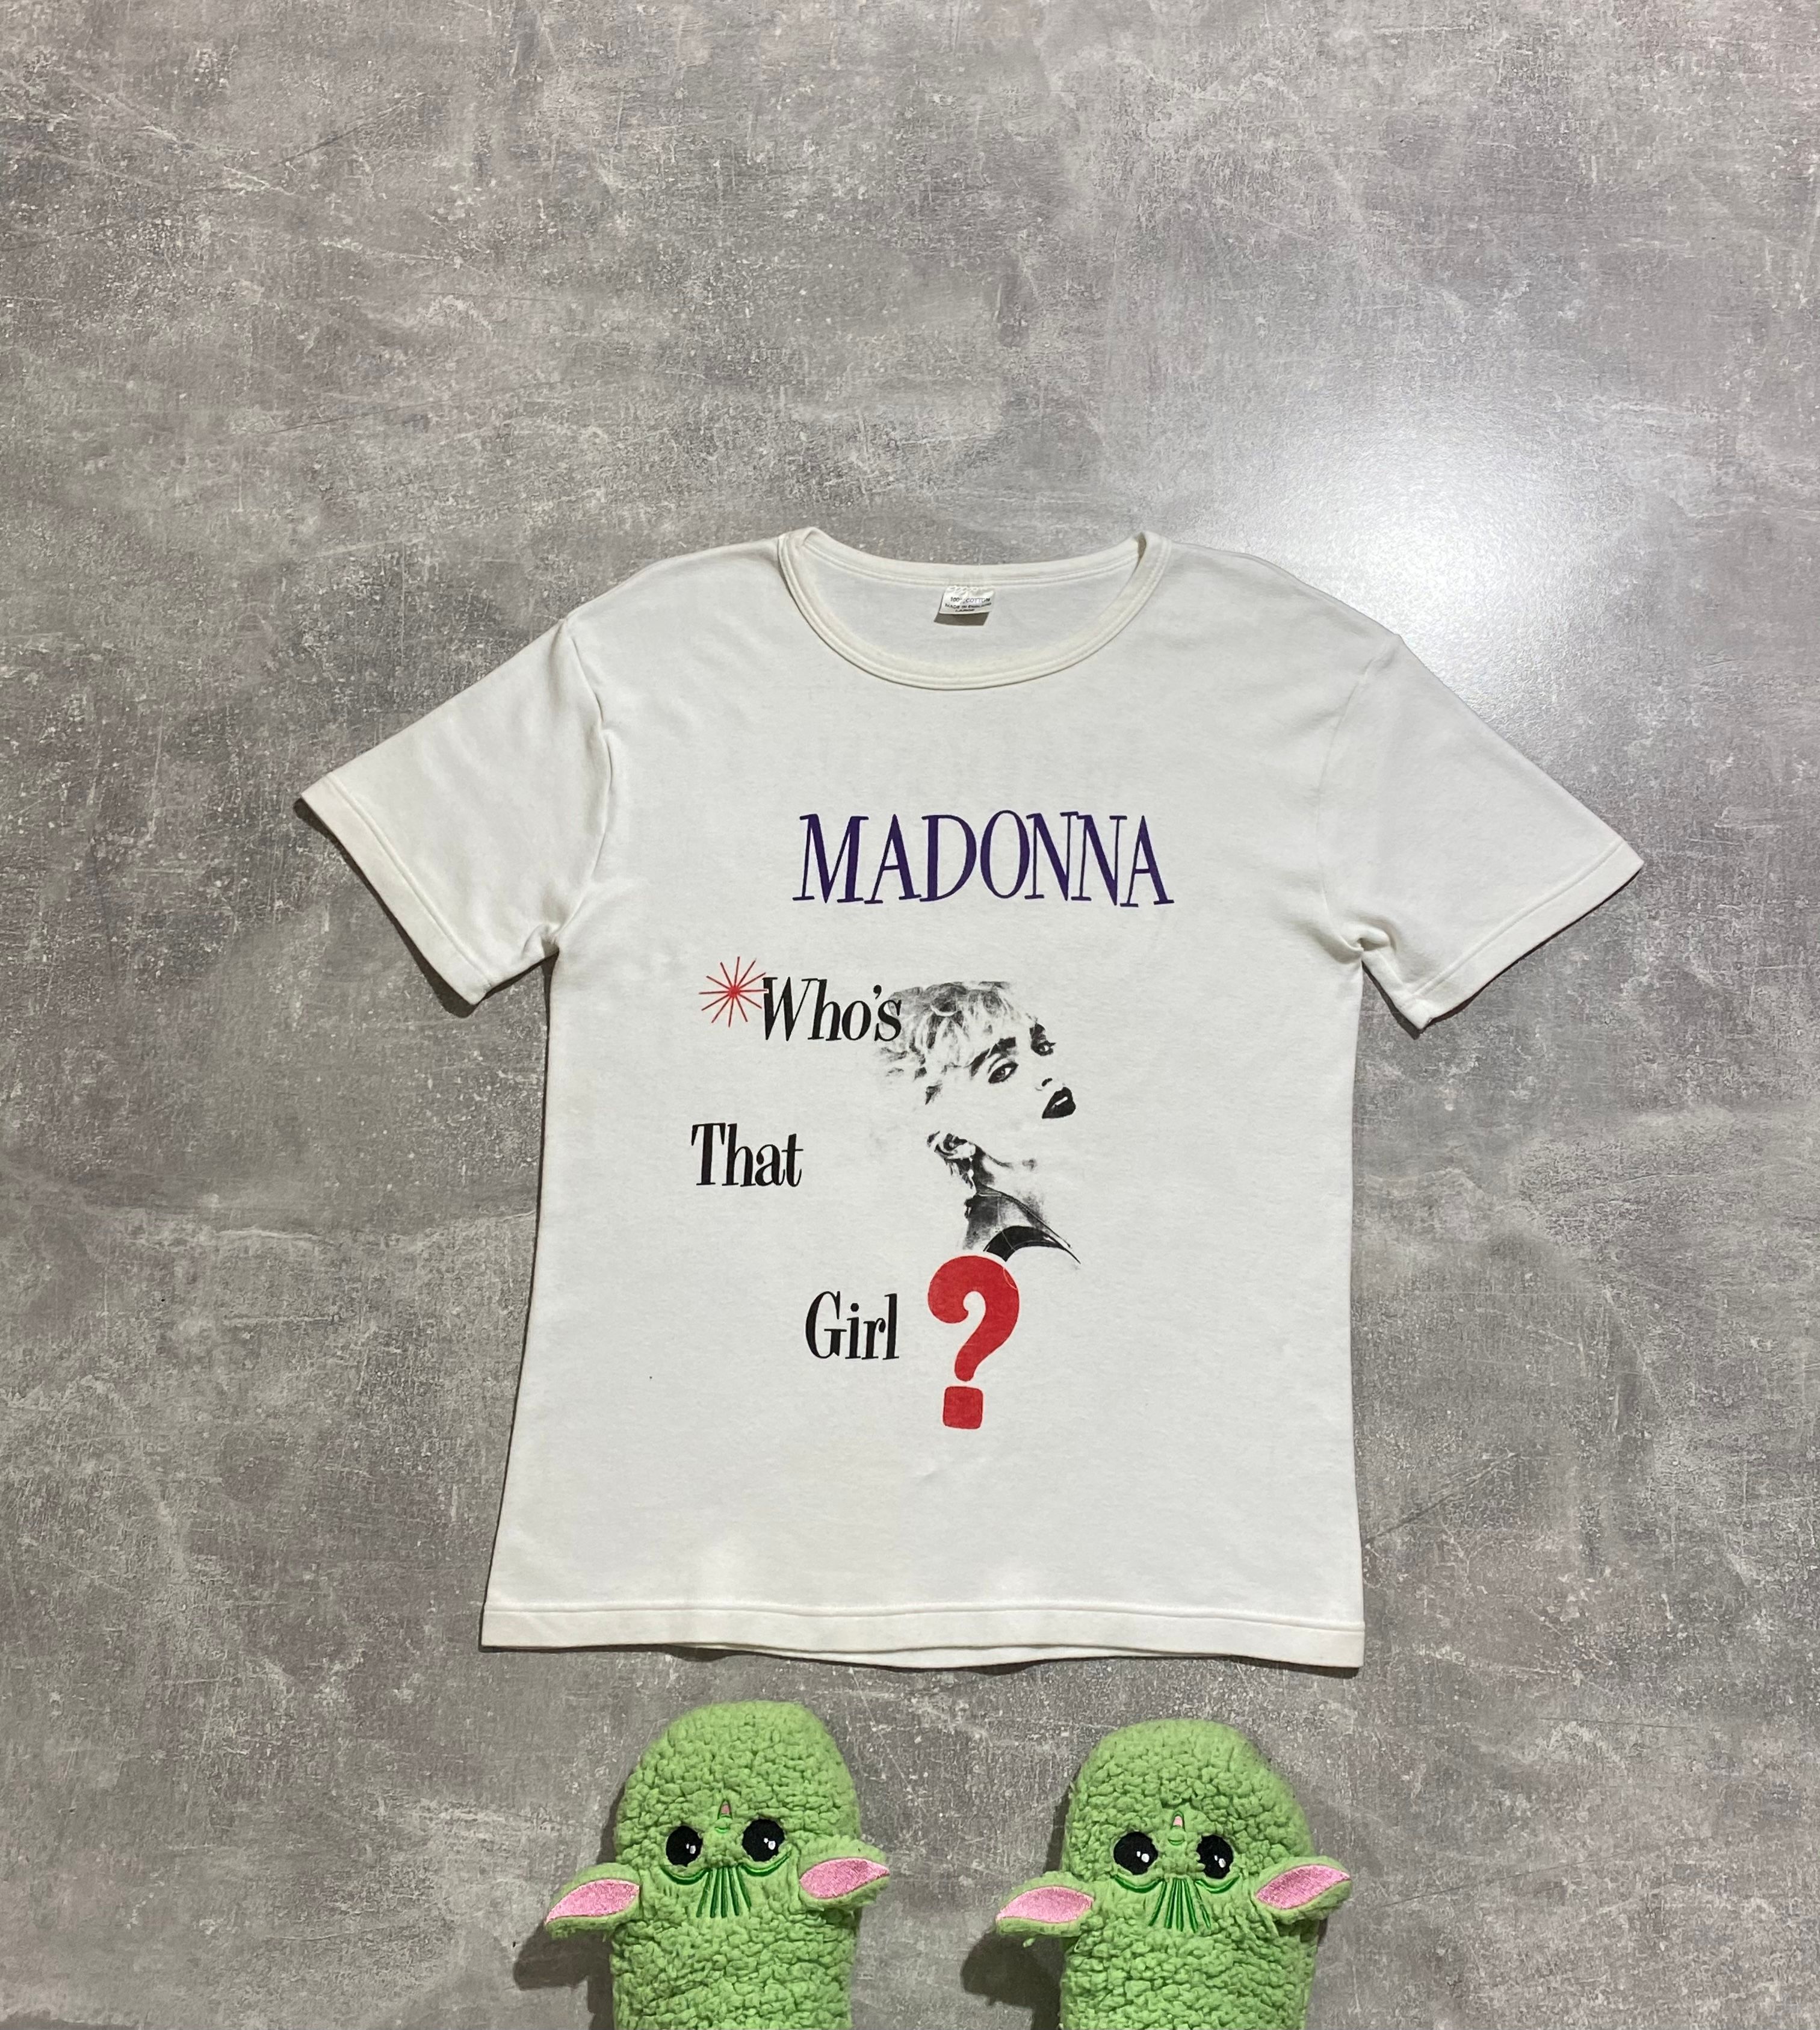 Pre-owned Band Tees Vintage 1987 Madonna Who's That Girl Tour T-shirt In White Beige